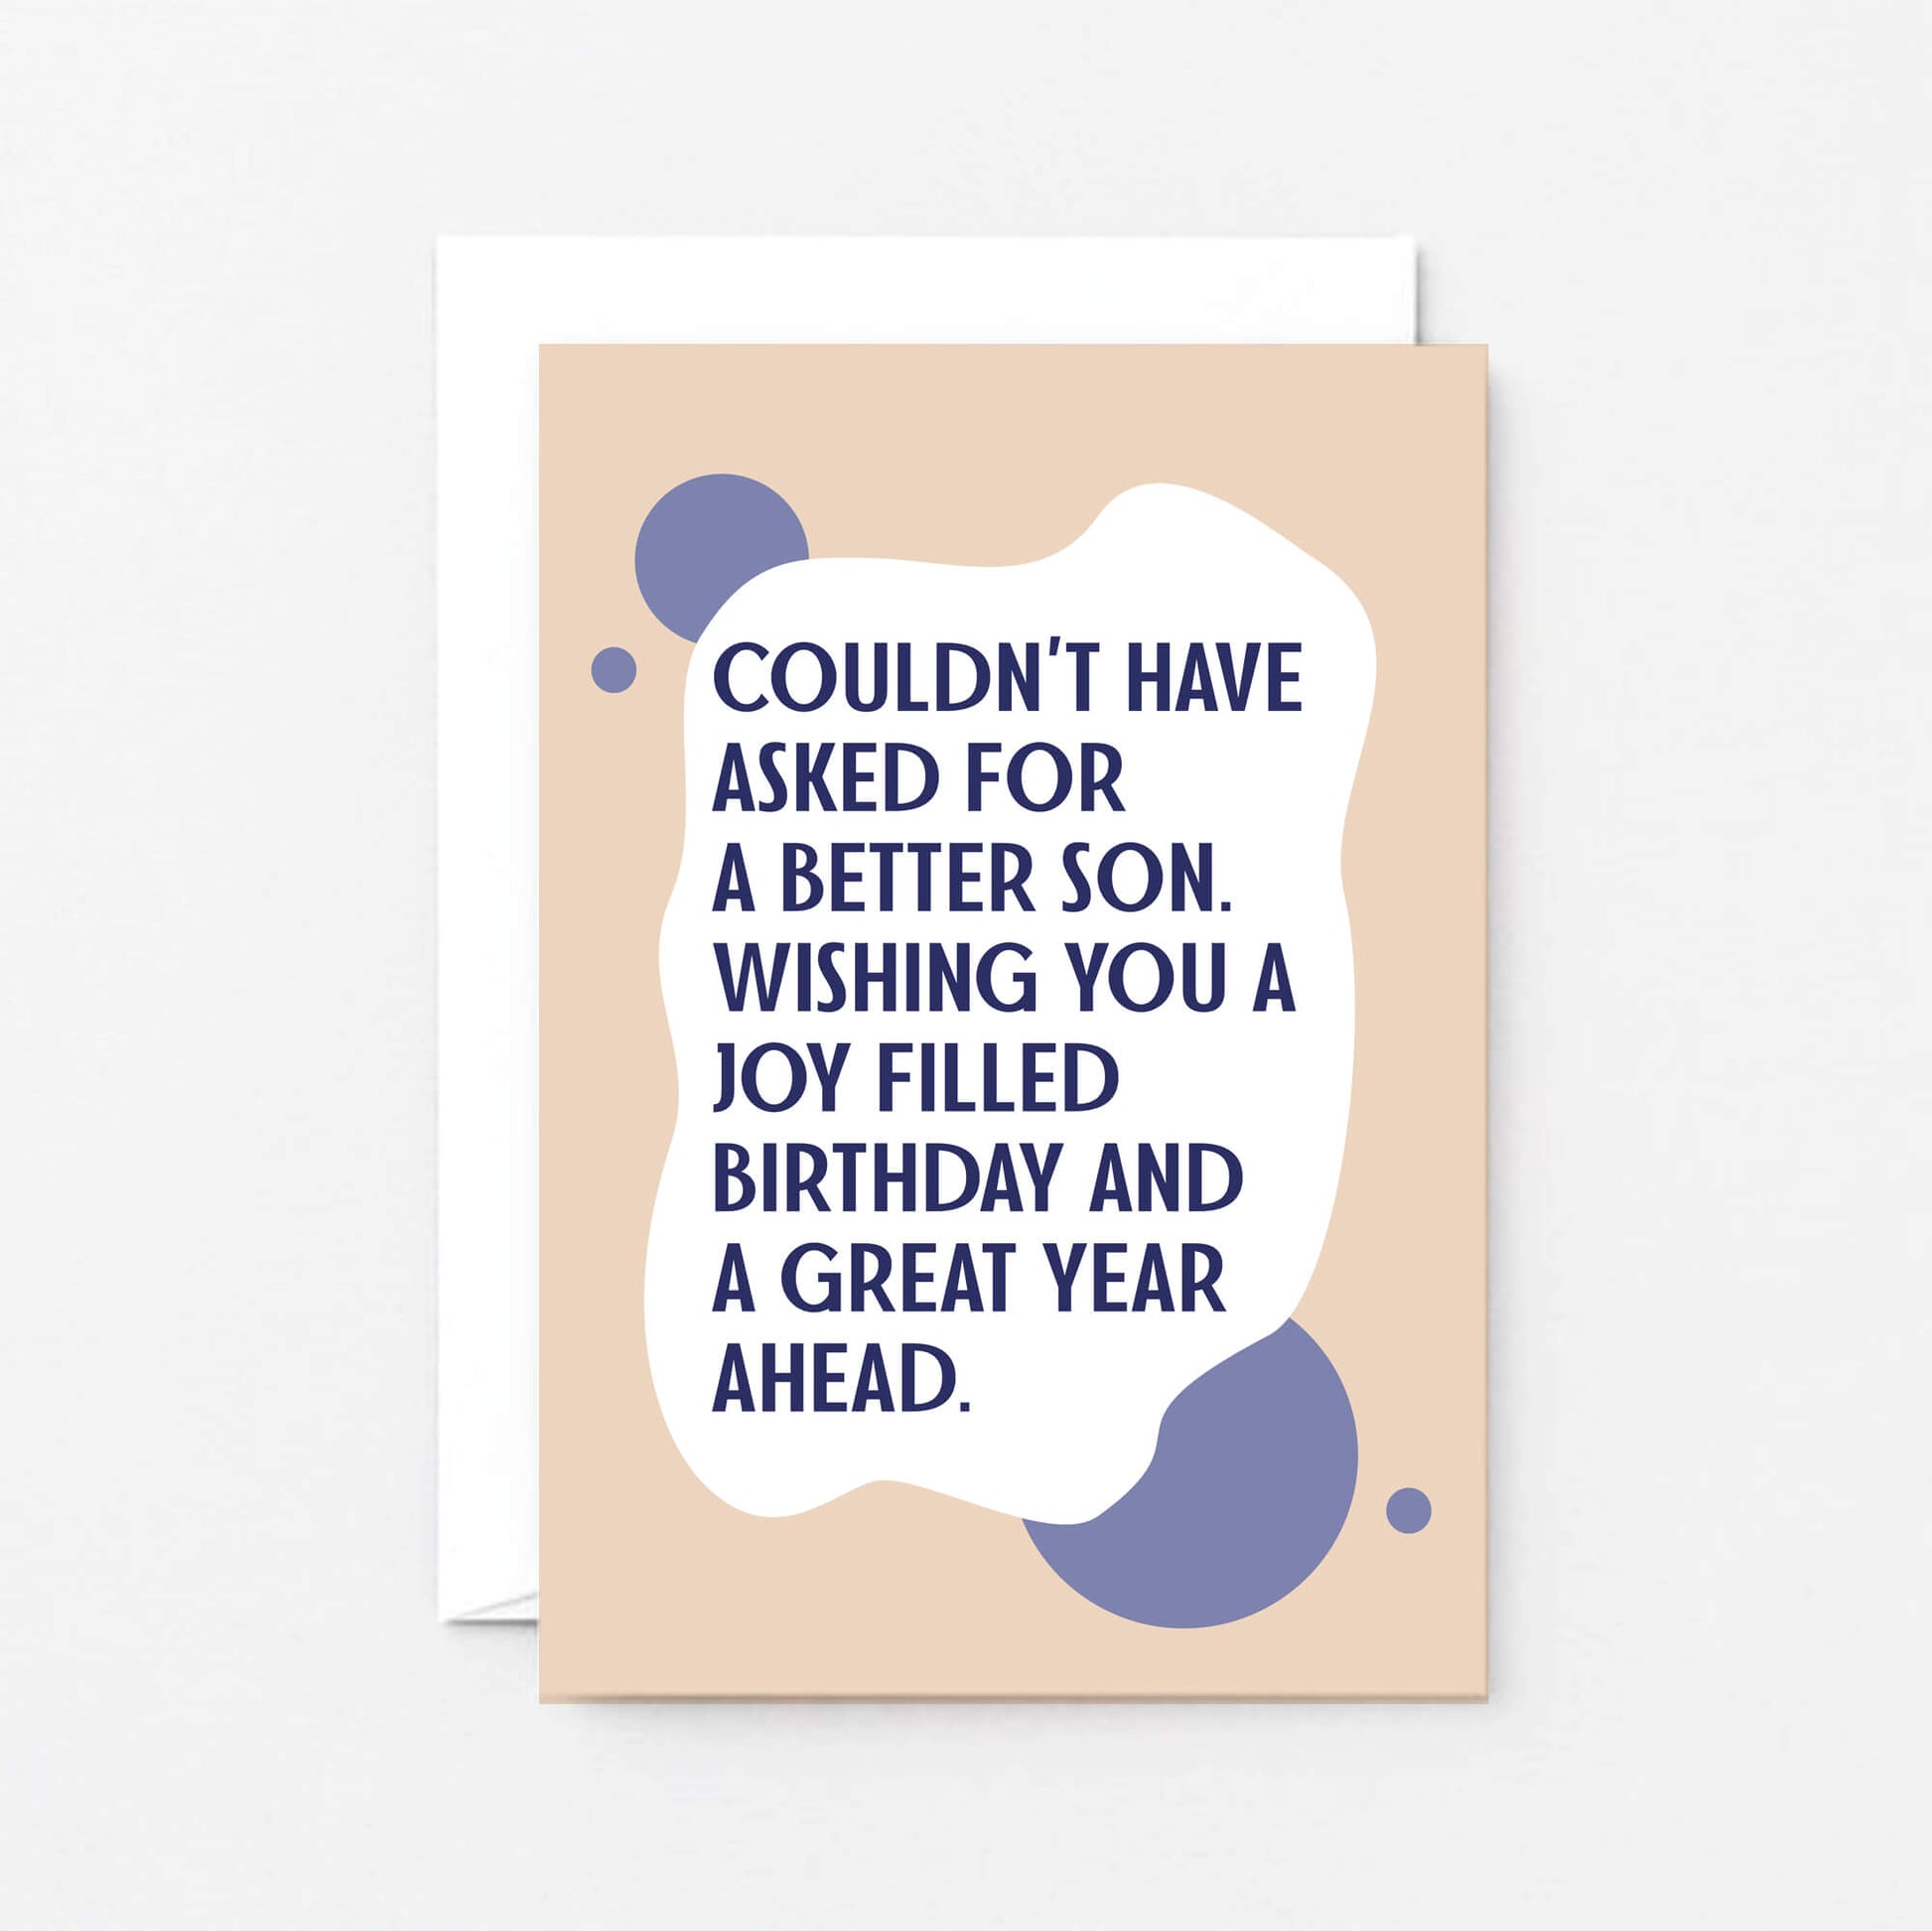 Son Birthday Card by SixElevenCreations. Card reads Couldn't have asked for a better son. Wishing you a joy filled birthday and a great year ahead. Product Code SE1112A6